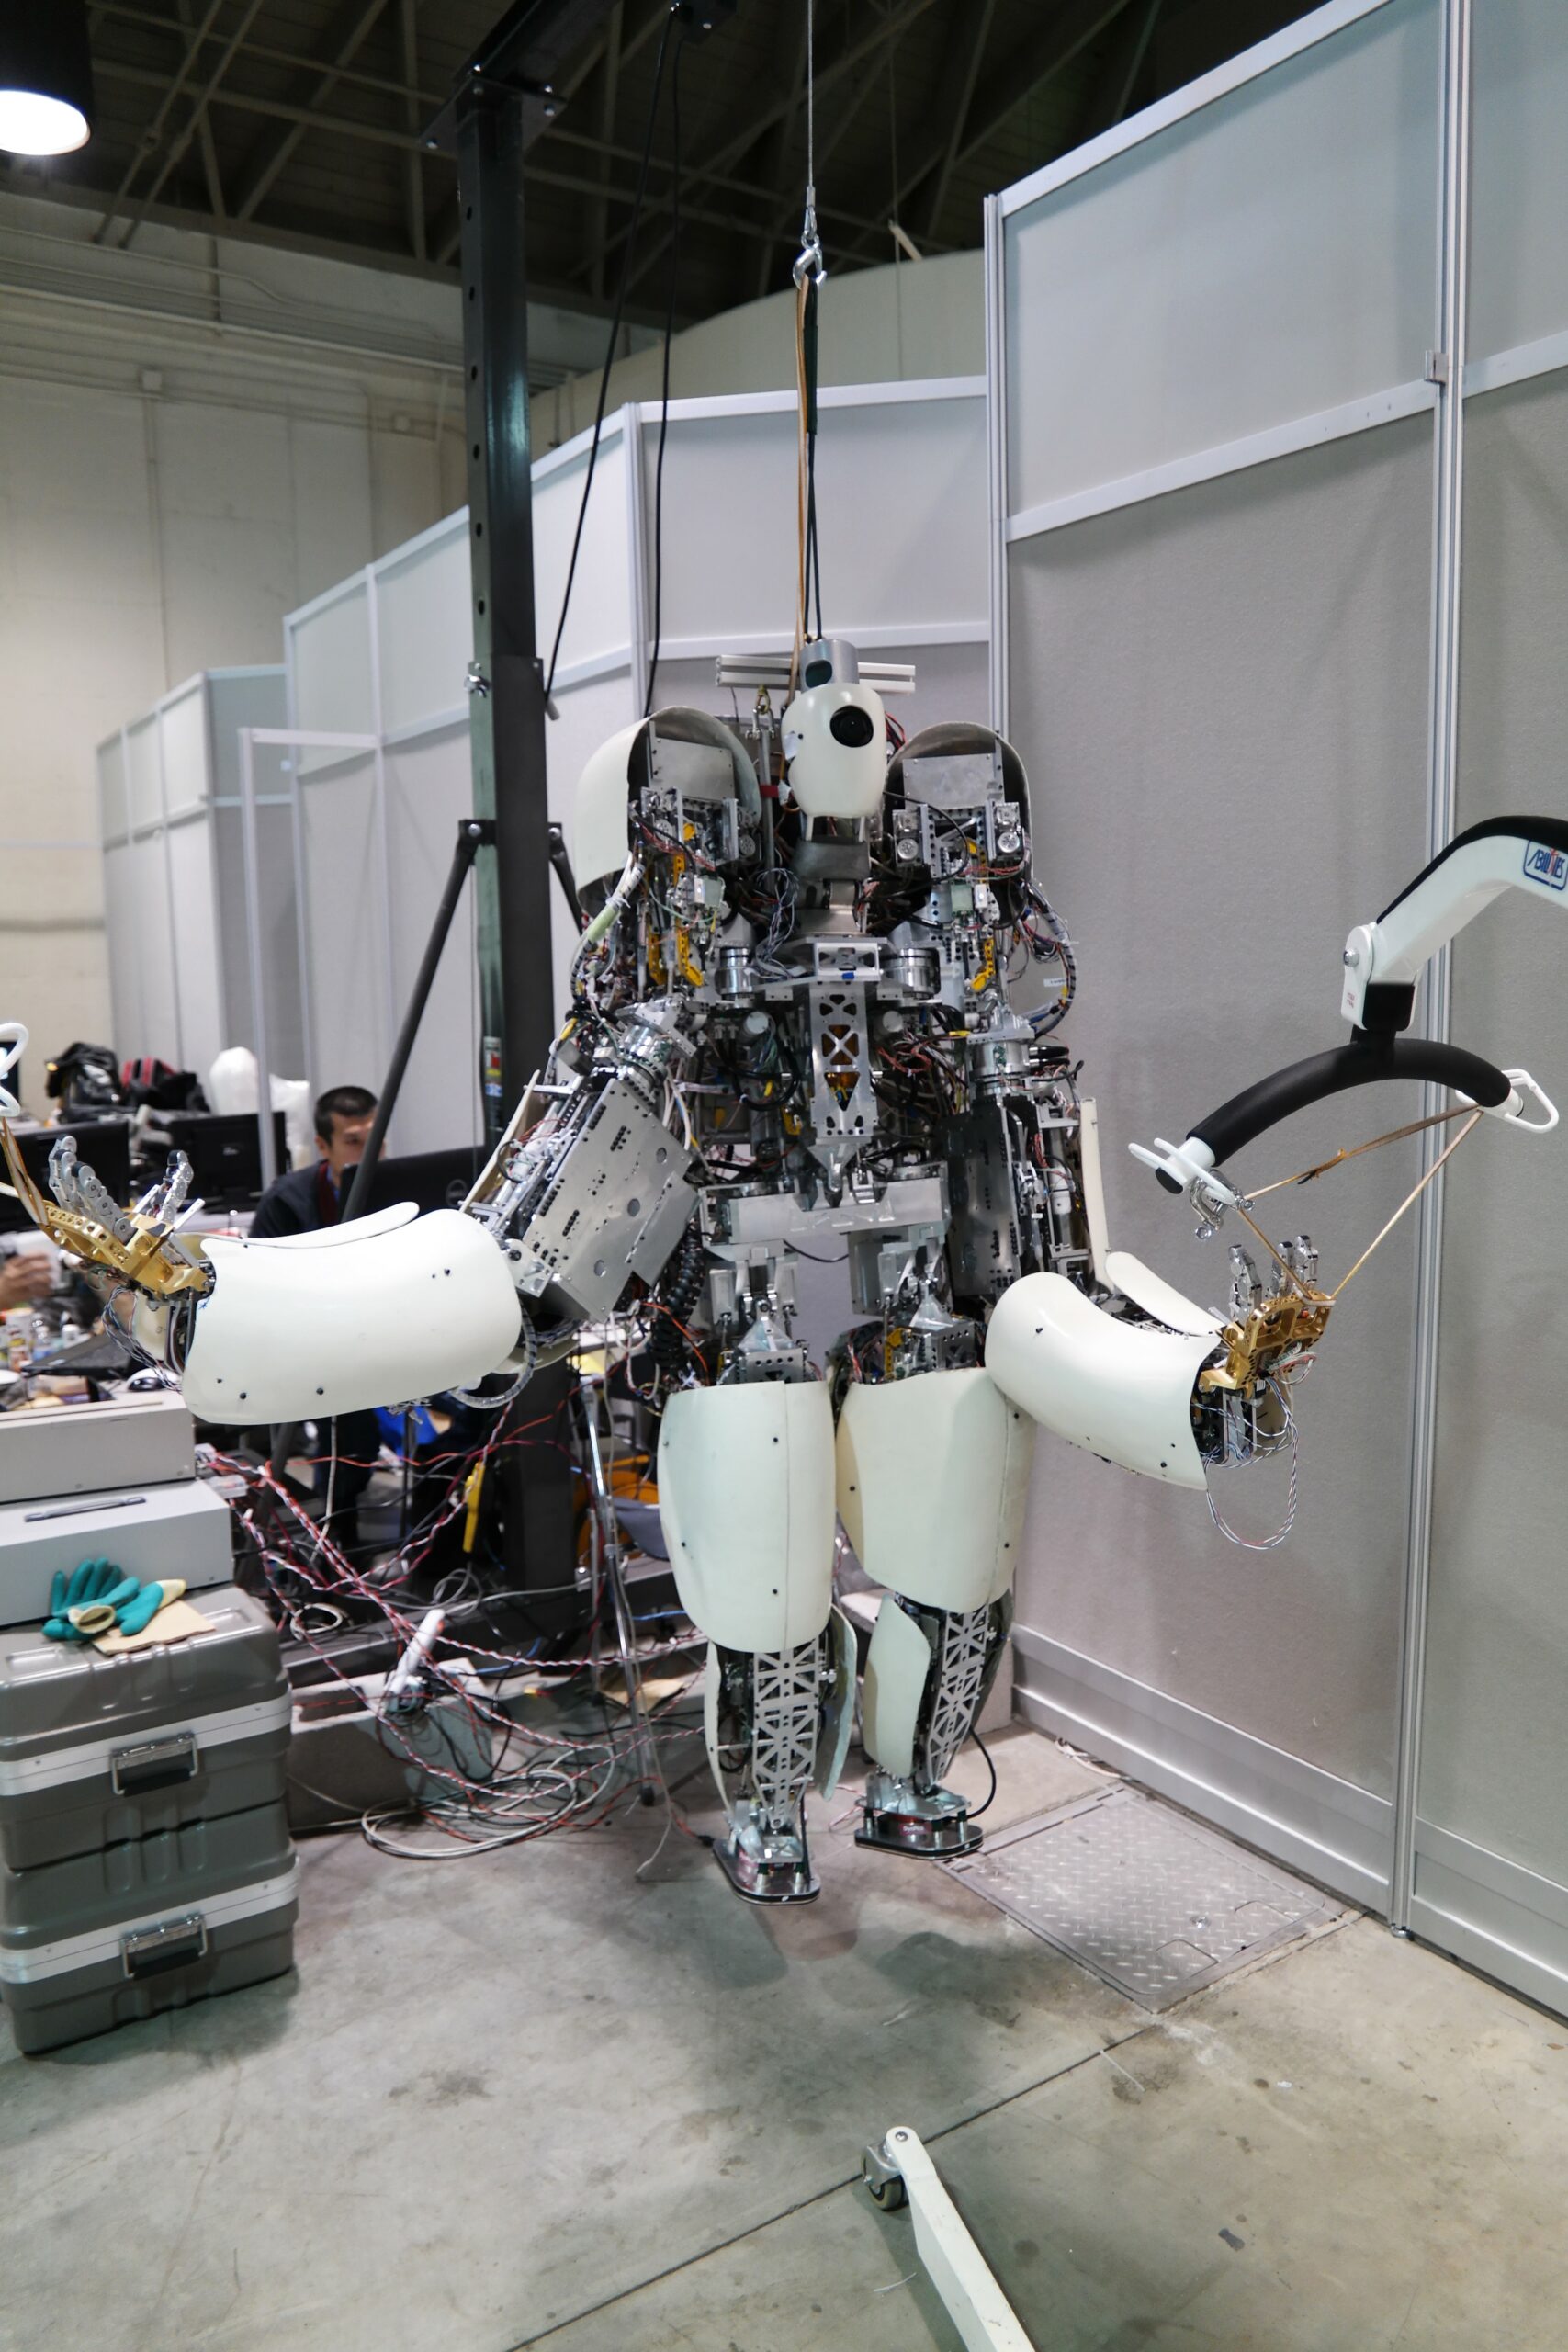 Meet Hydra, The Coolest Robot Not Competing In The DARPA Robotics Challenge